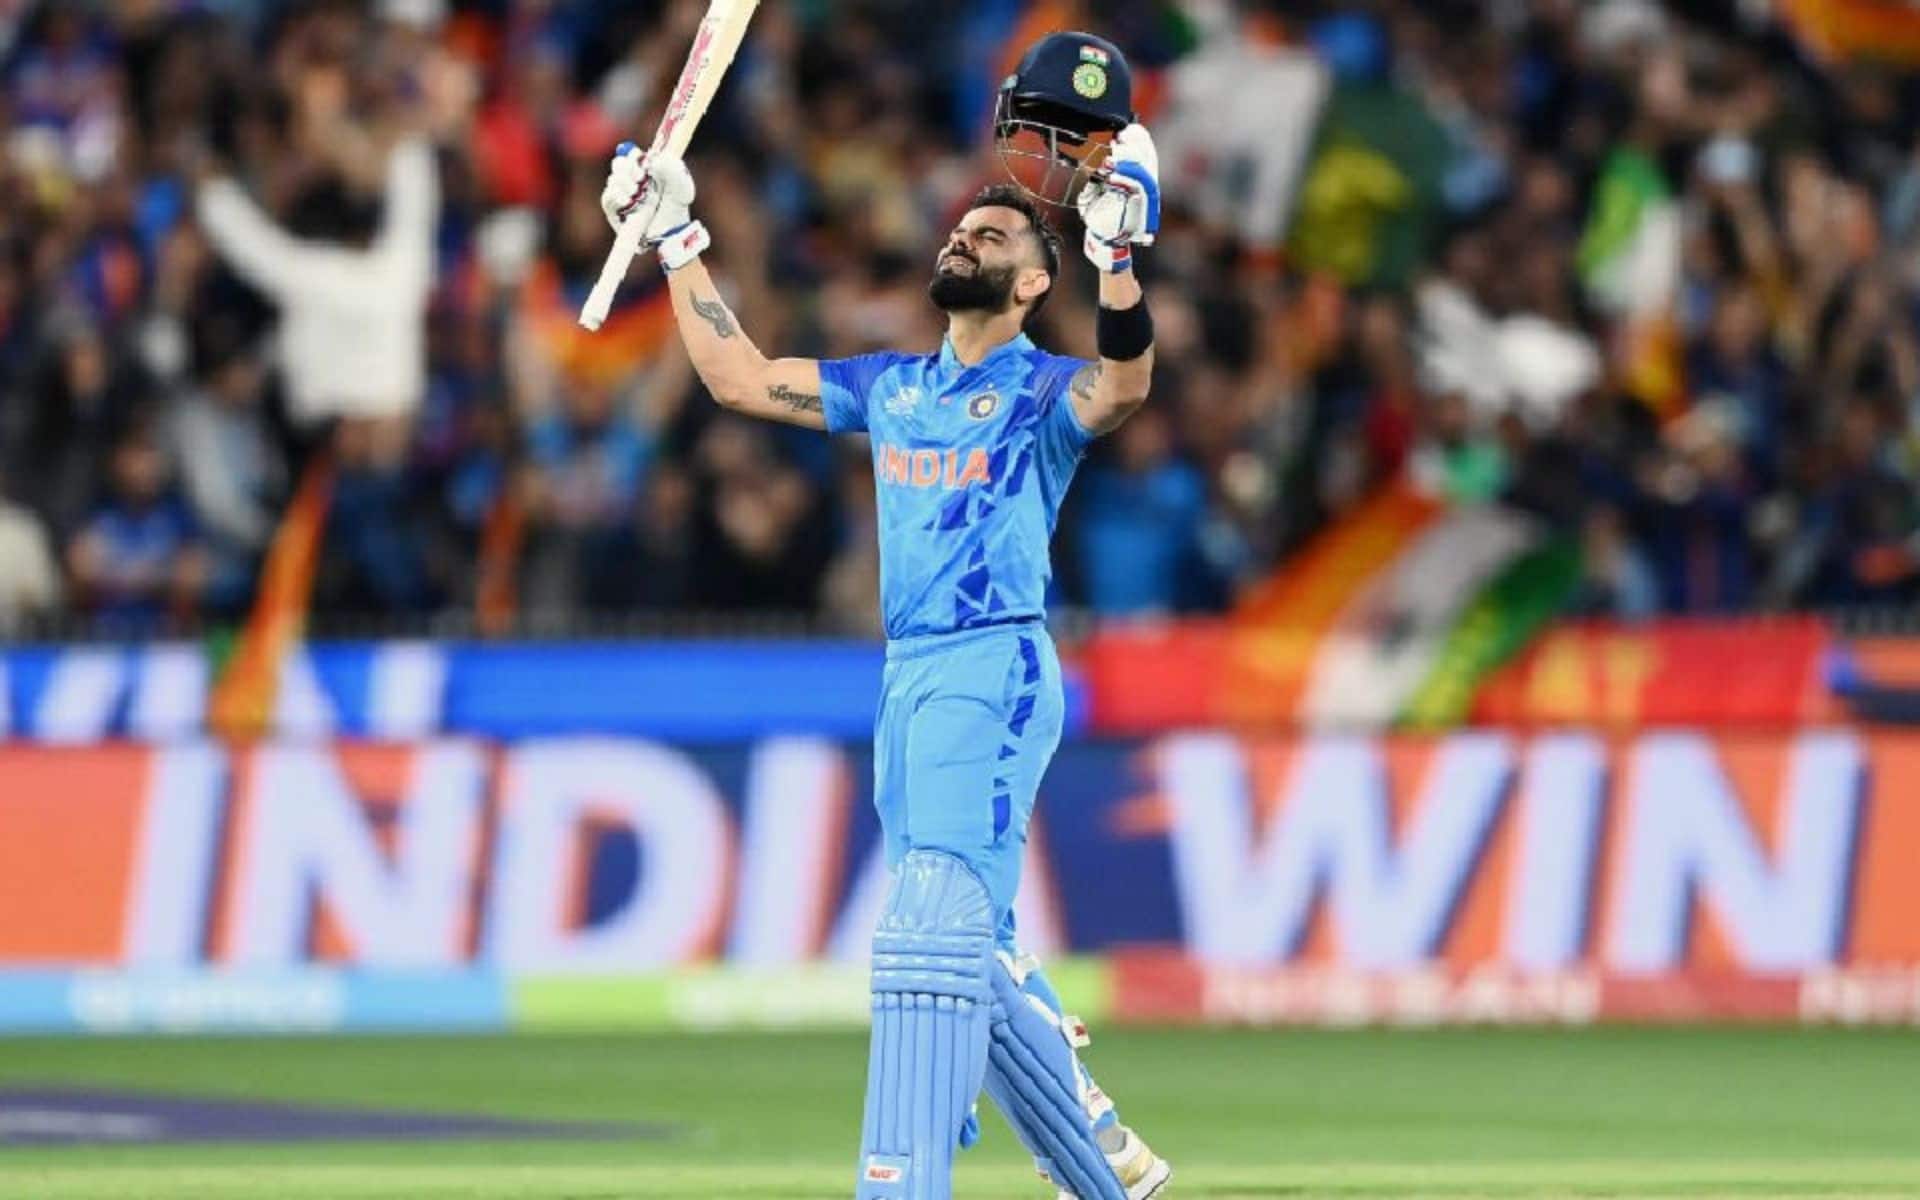 There are reports that Virat Kohli might be dropped from WC squad | Source: X.com